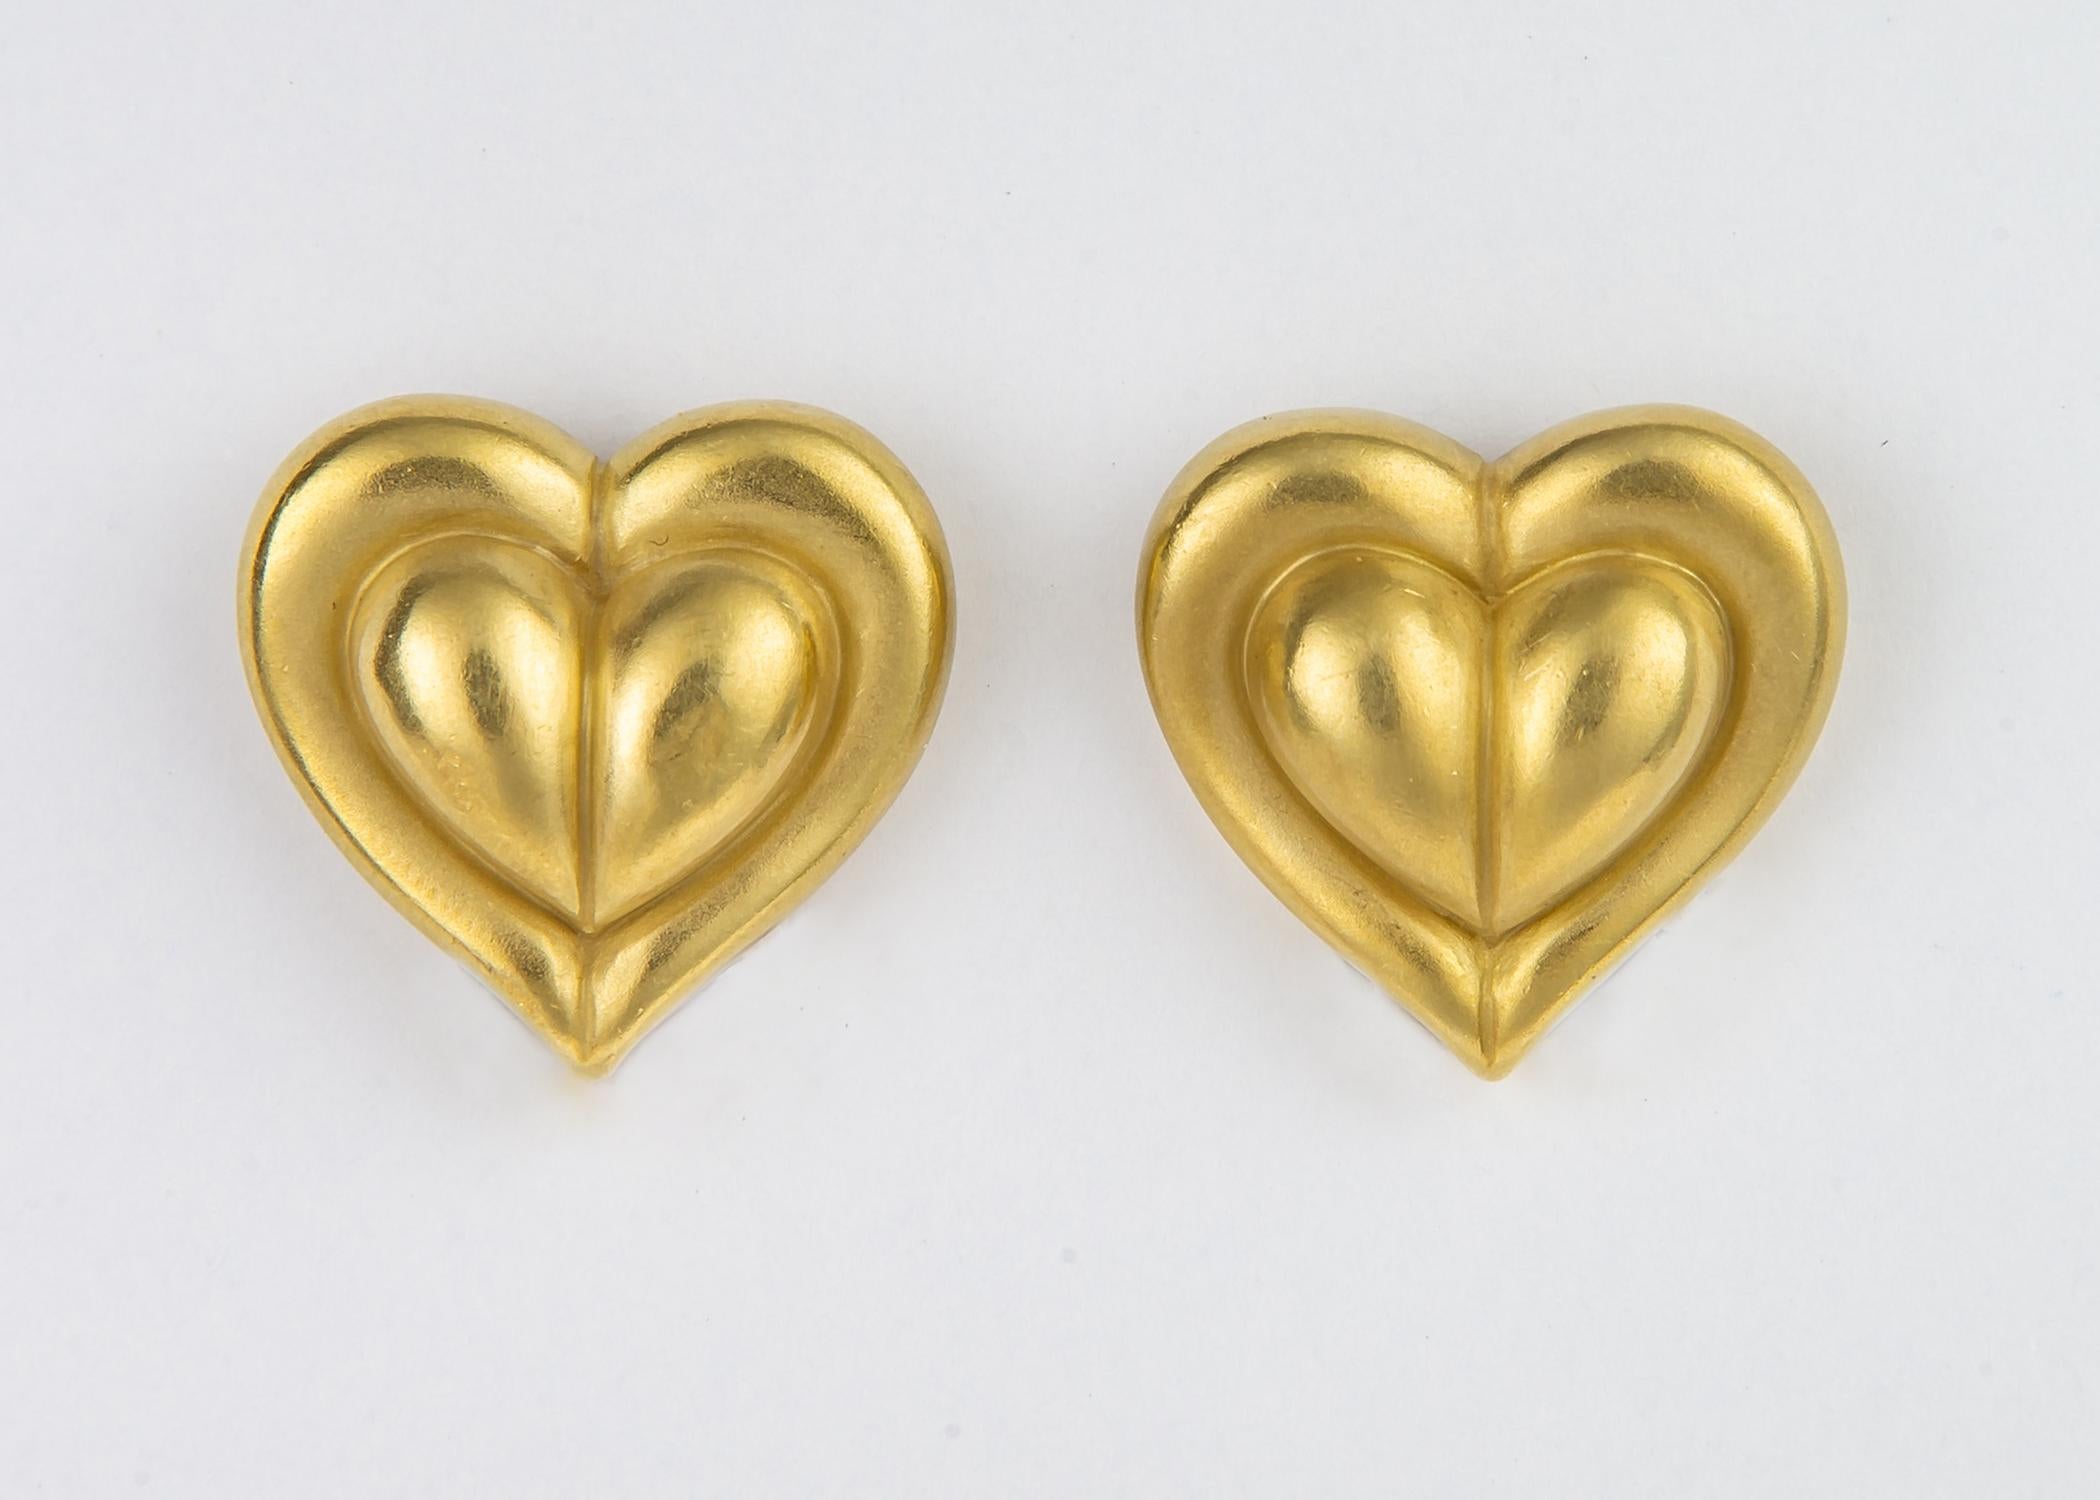 Barry Kieselstein-Cord designs have withstood the test of time. This simple heart motif design can be your new all the time earring.  7/8's of an inch 